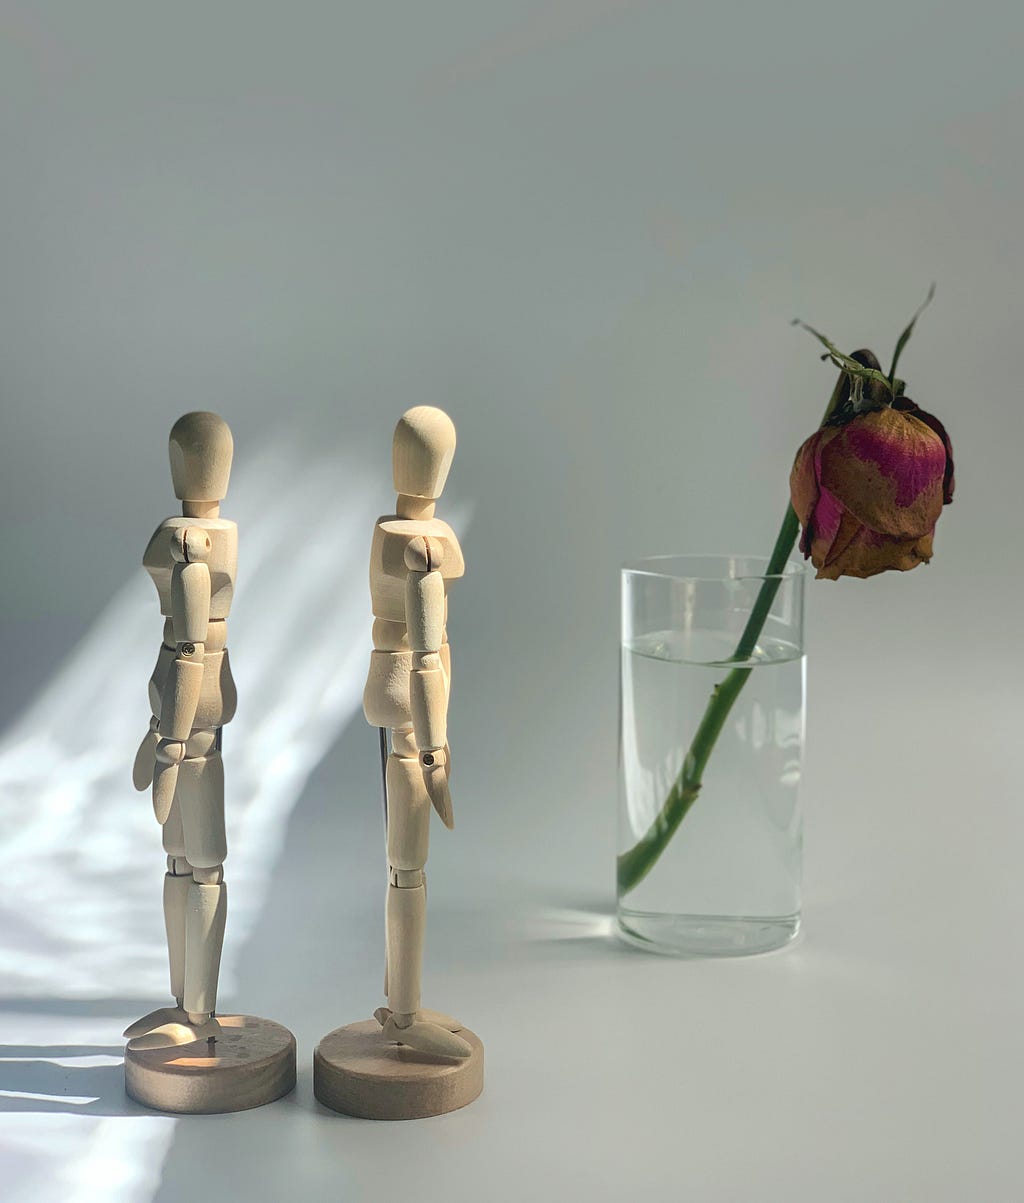 Two wooden form dolls face away from one another next to a wilting rose in a glass of water